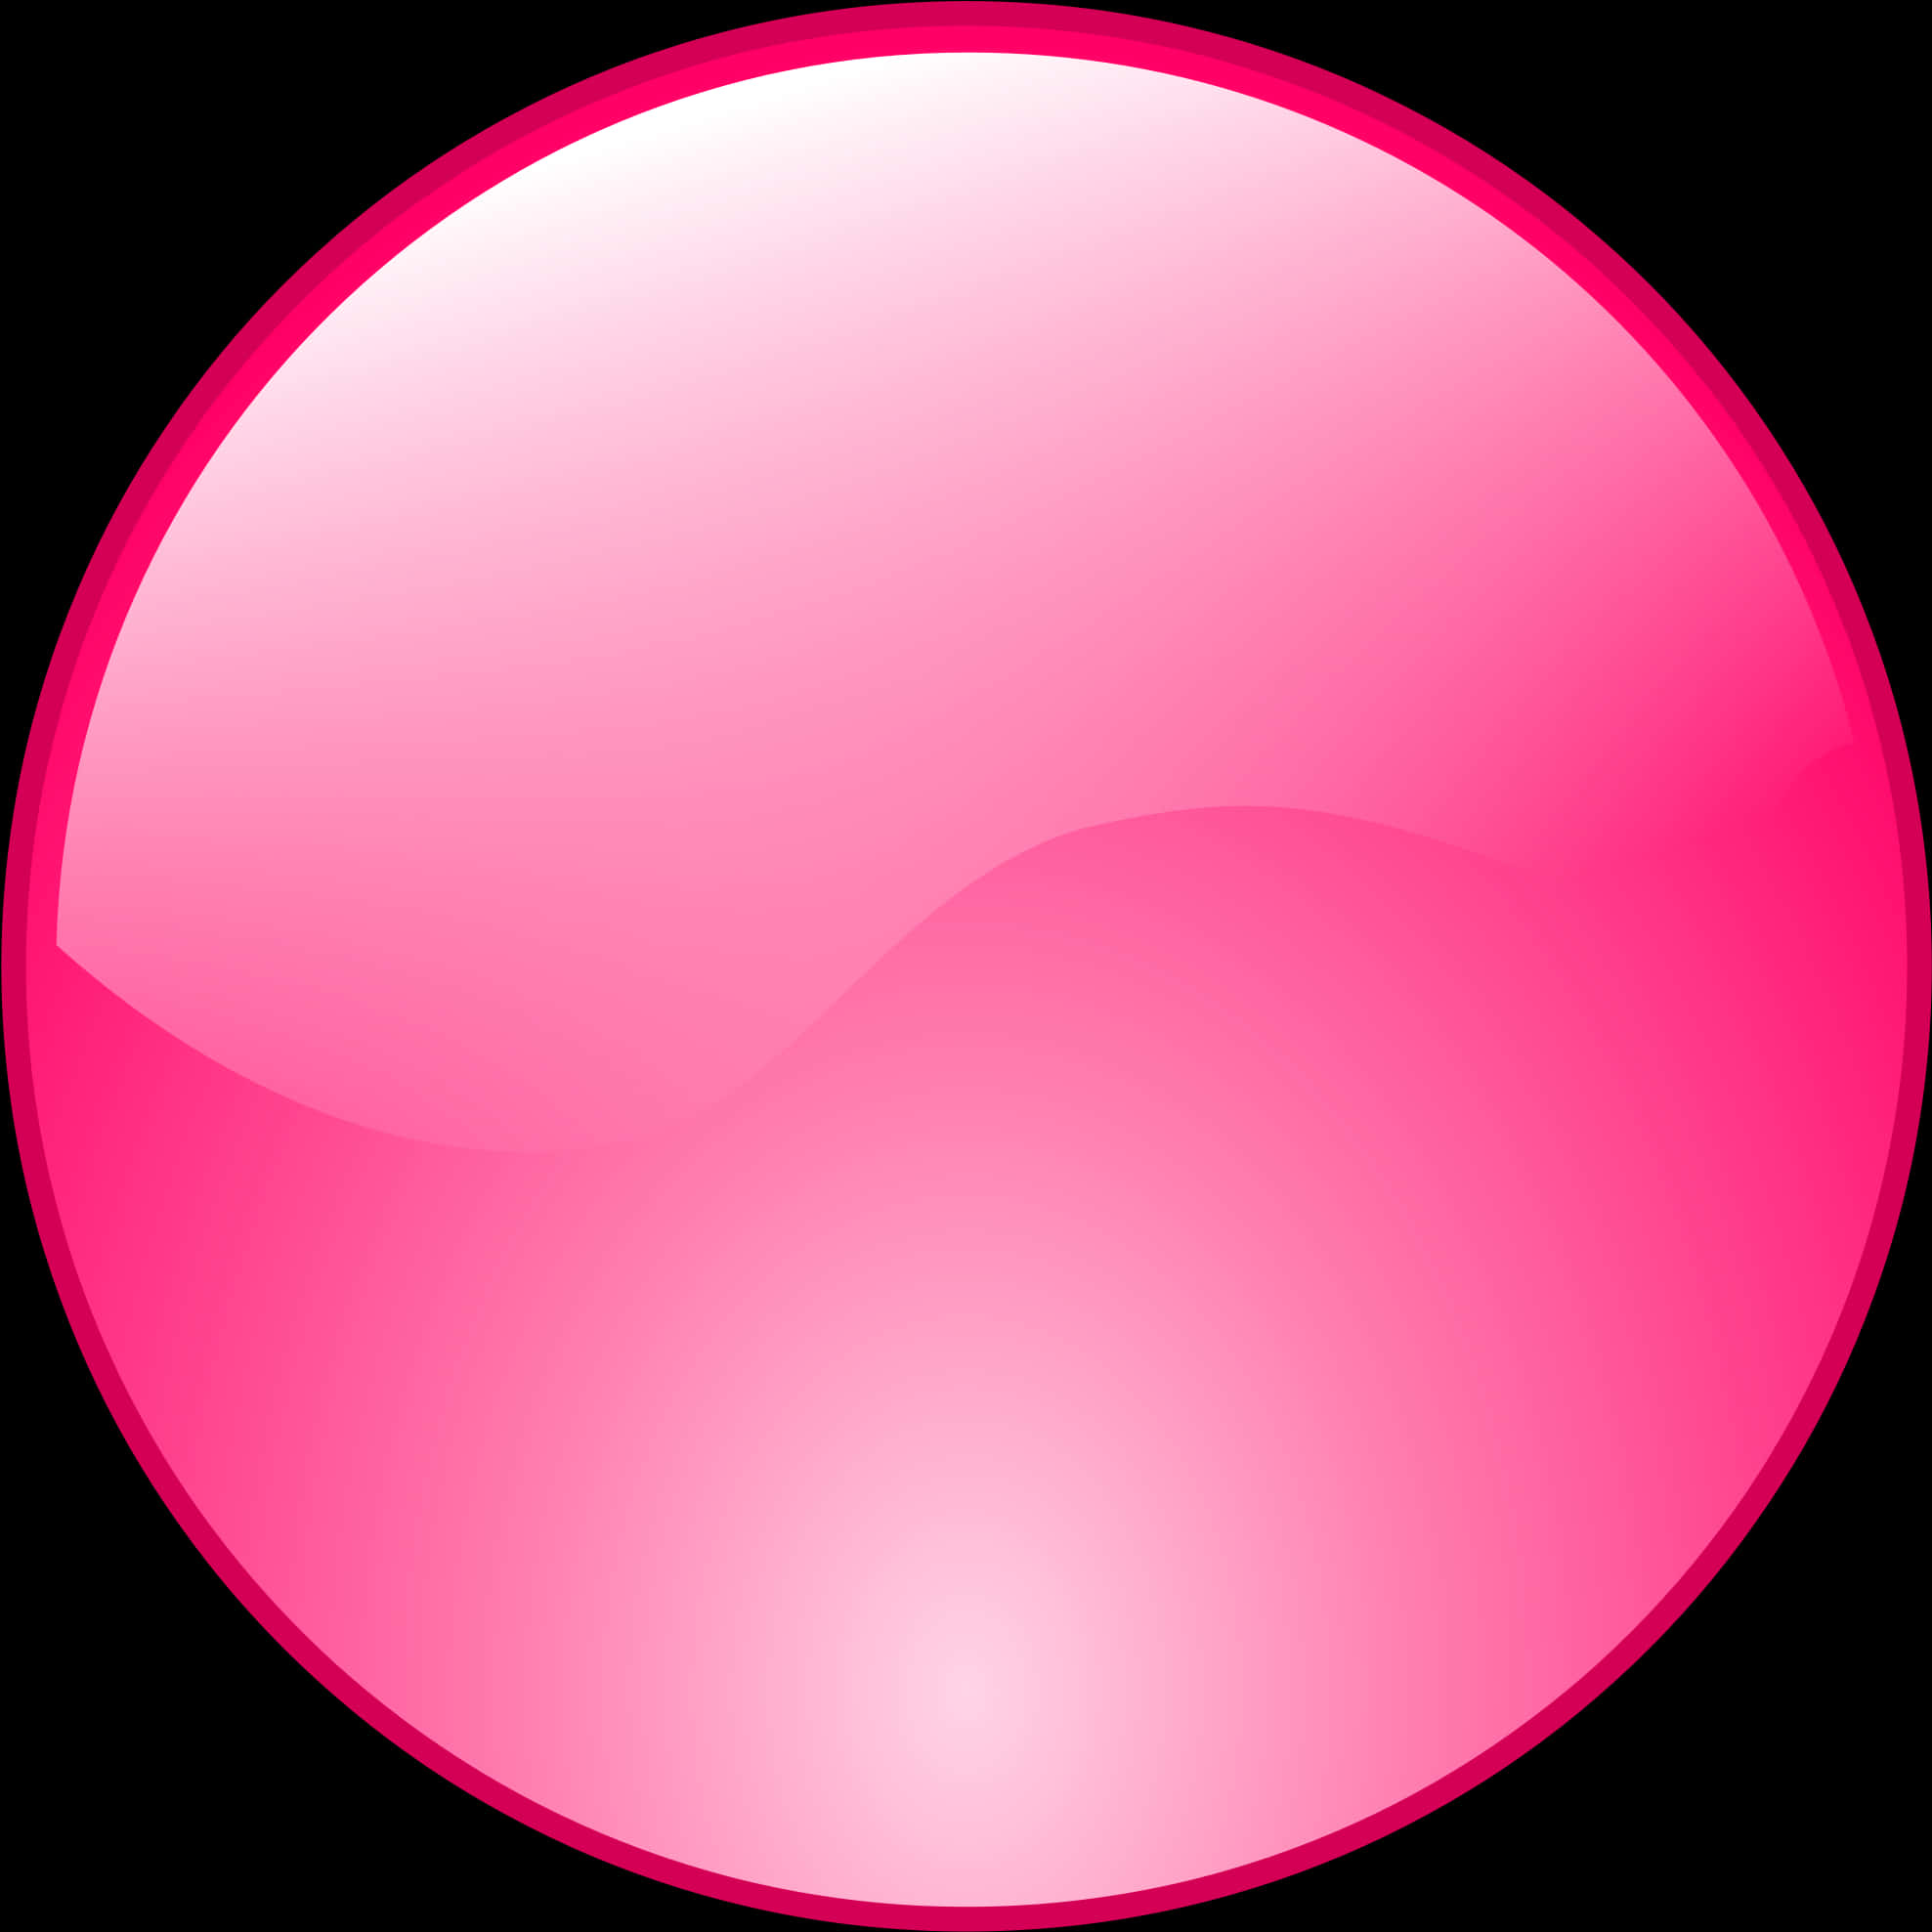 Abstract Pink Sphere Graphic PNG